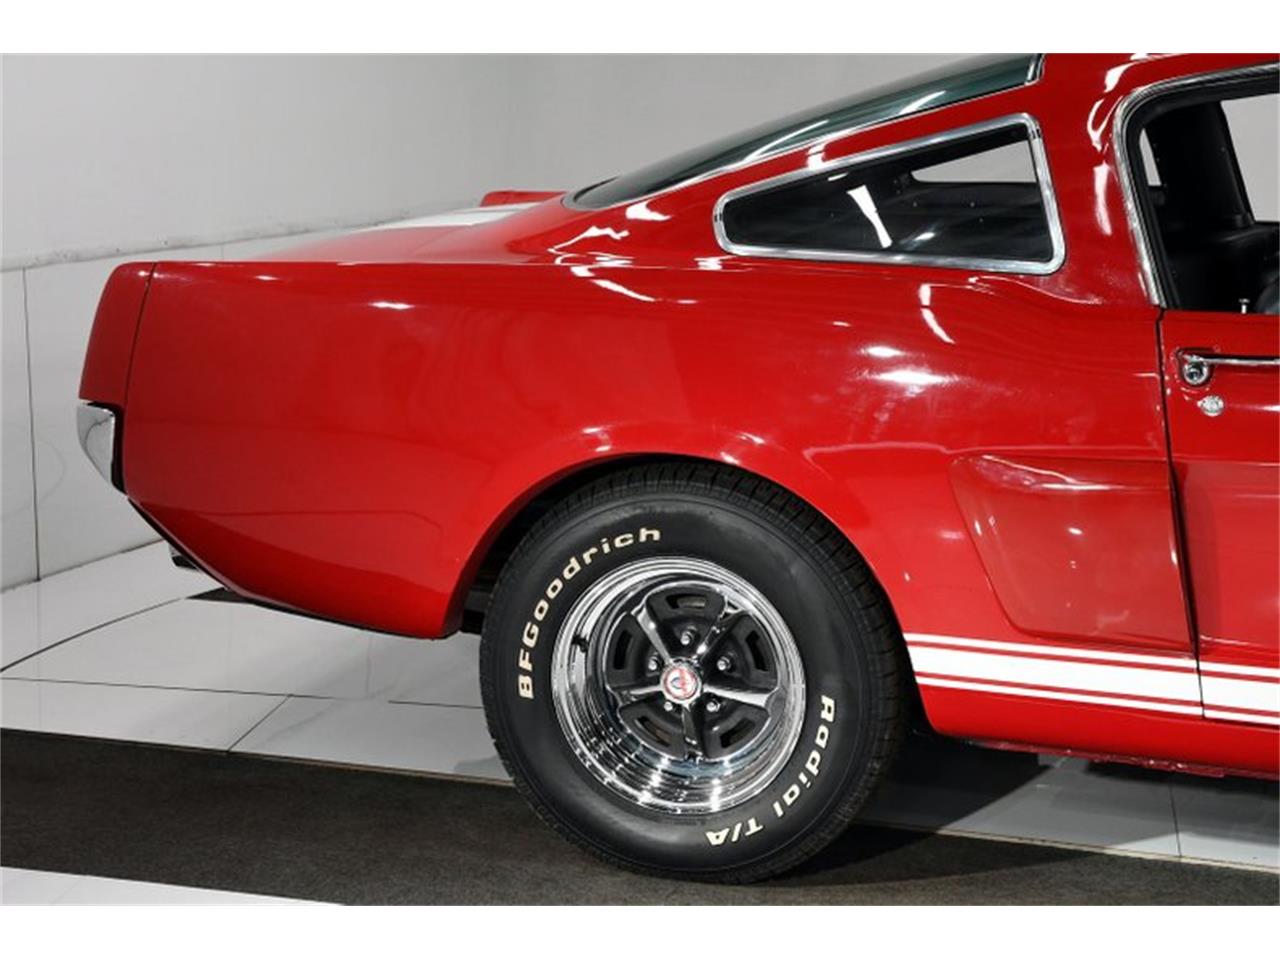 Ford Mustang Shely 350 v8 302 1966 prix tout compris